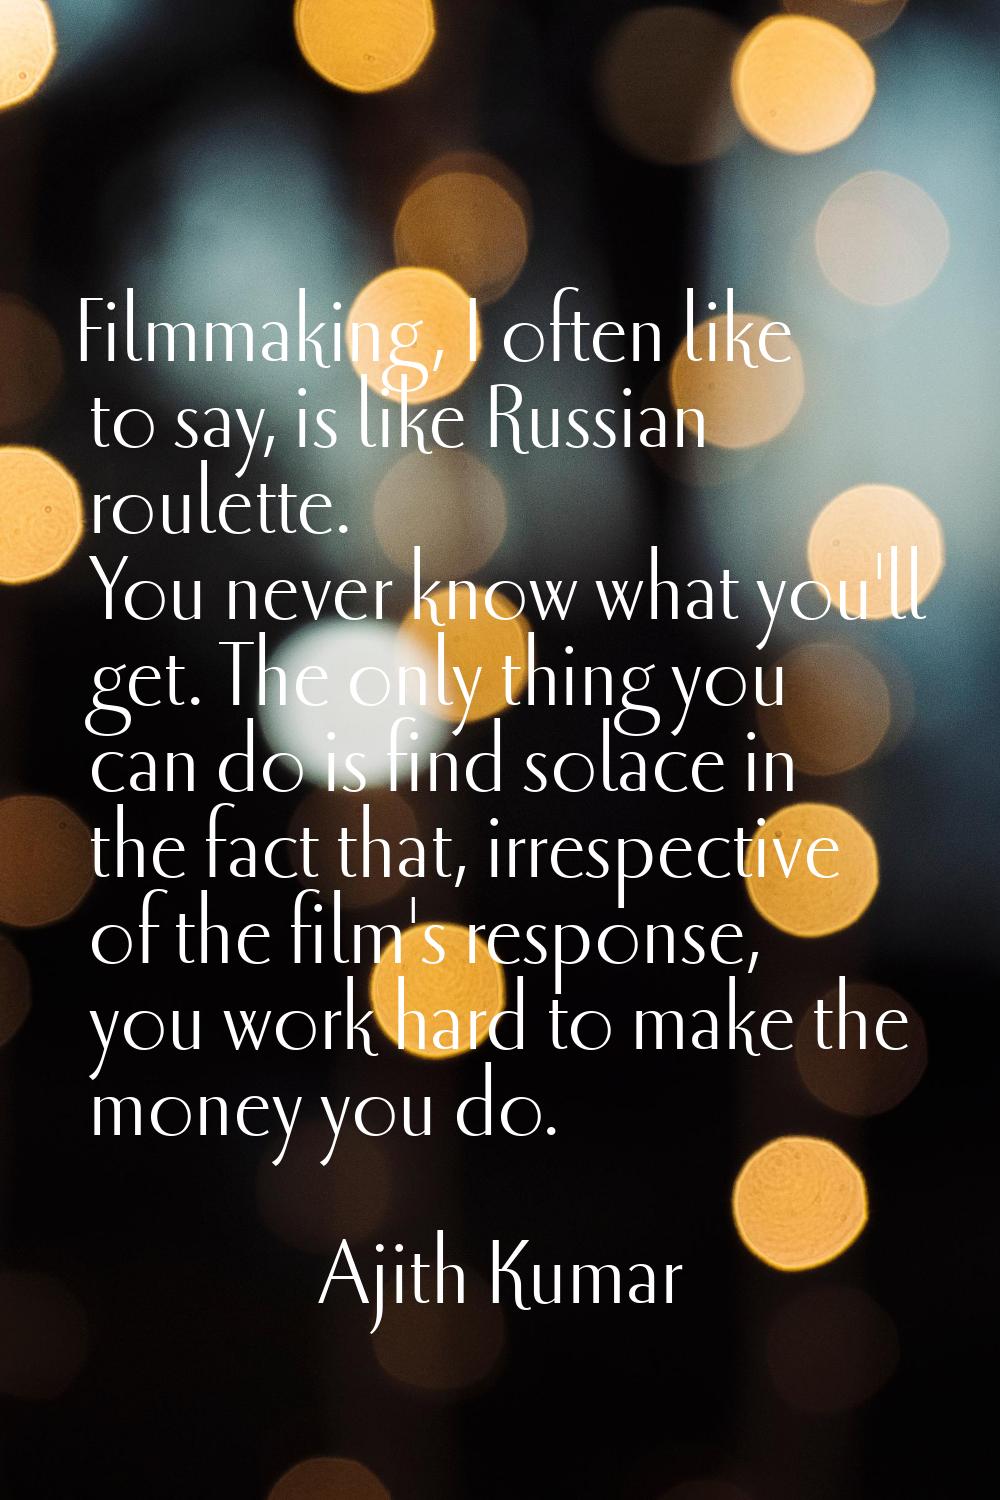 Filmmaking, I often like to say, is like Russian roulette. You never know what you'll get. The only